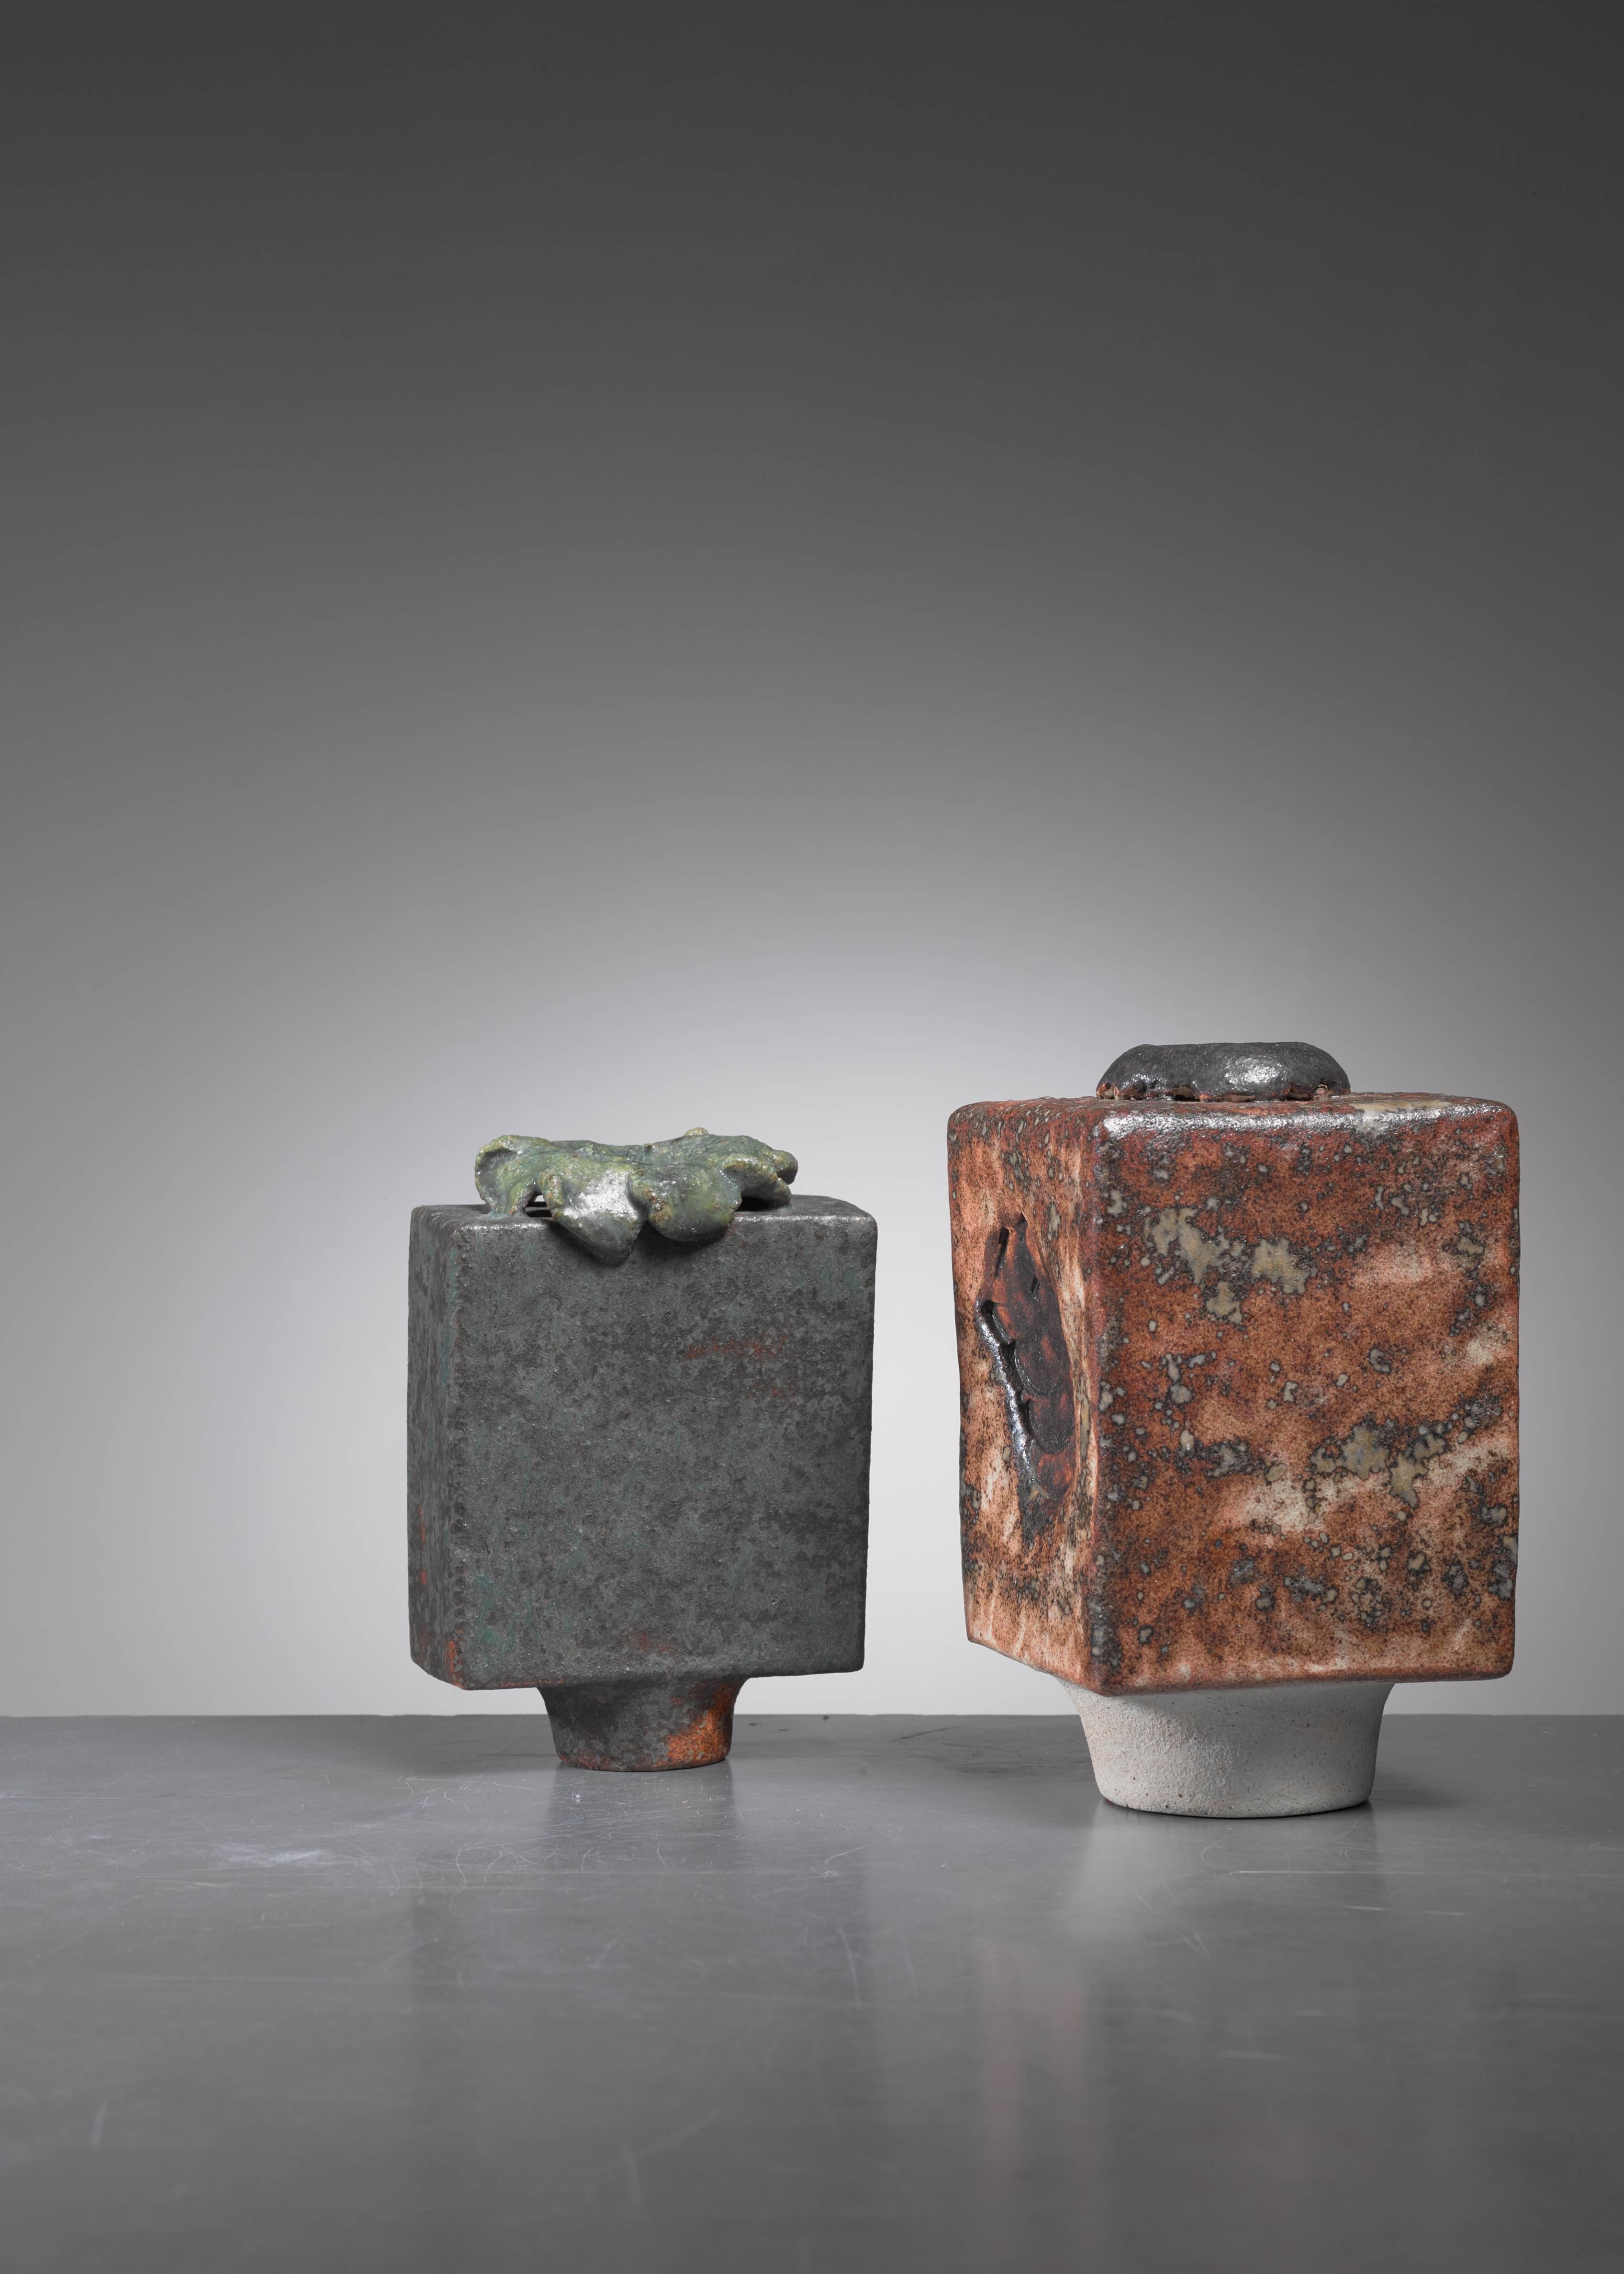 A pair of sculptural ceramic vases by German ceramist Lotte Reimers, 1932.

The measurements stated are of the anthracite and green vase. The brown piece is 9 by 9 cm and 16 cm high. Signed by Reimers with the years of production (1973 and